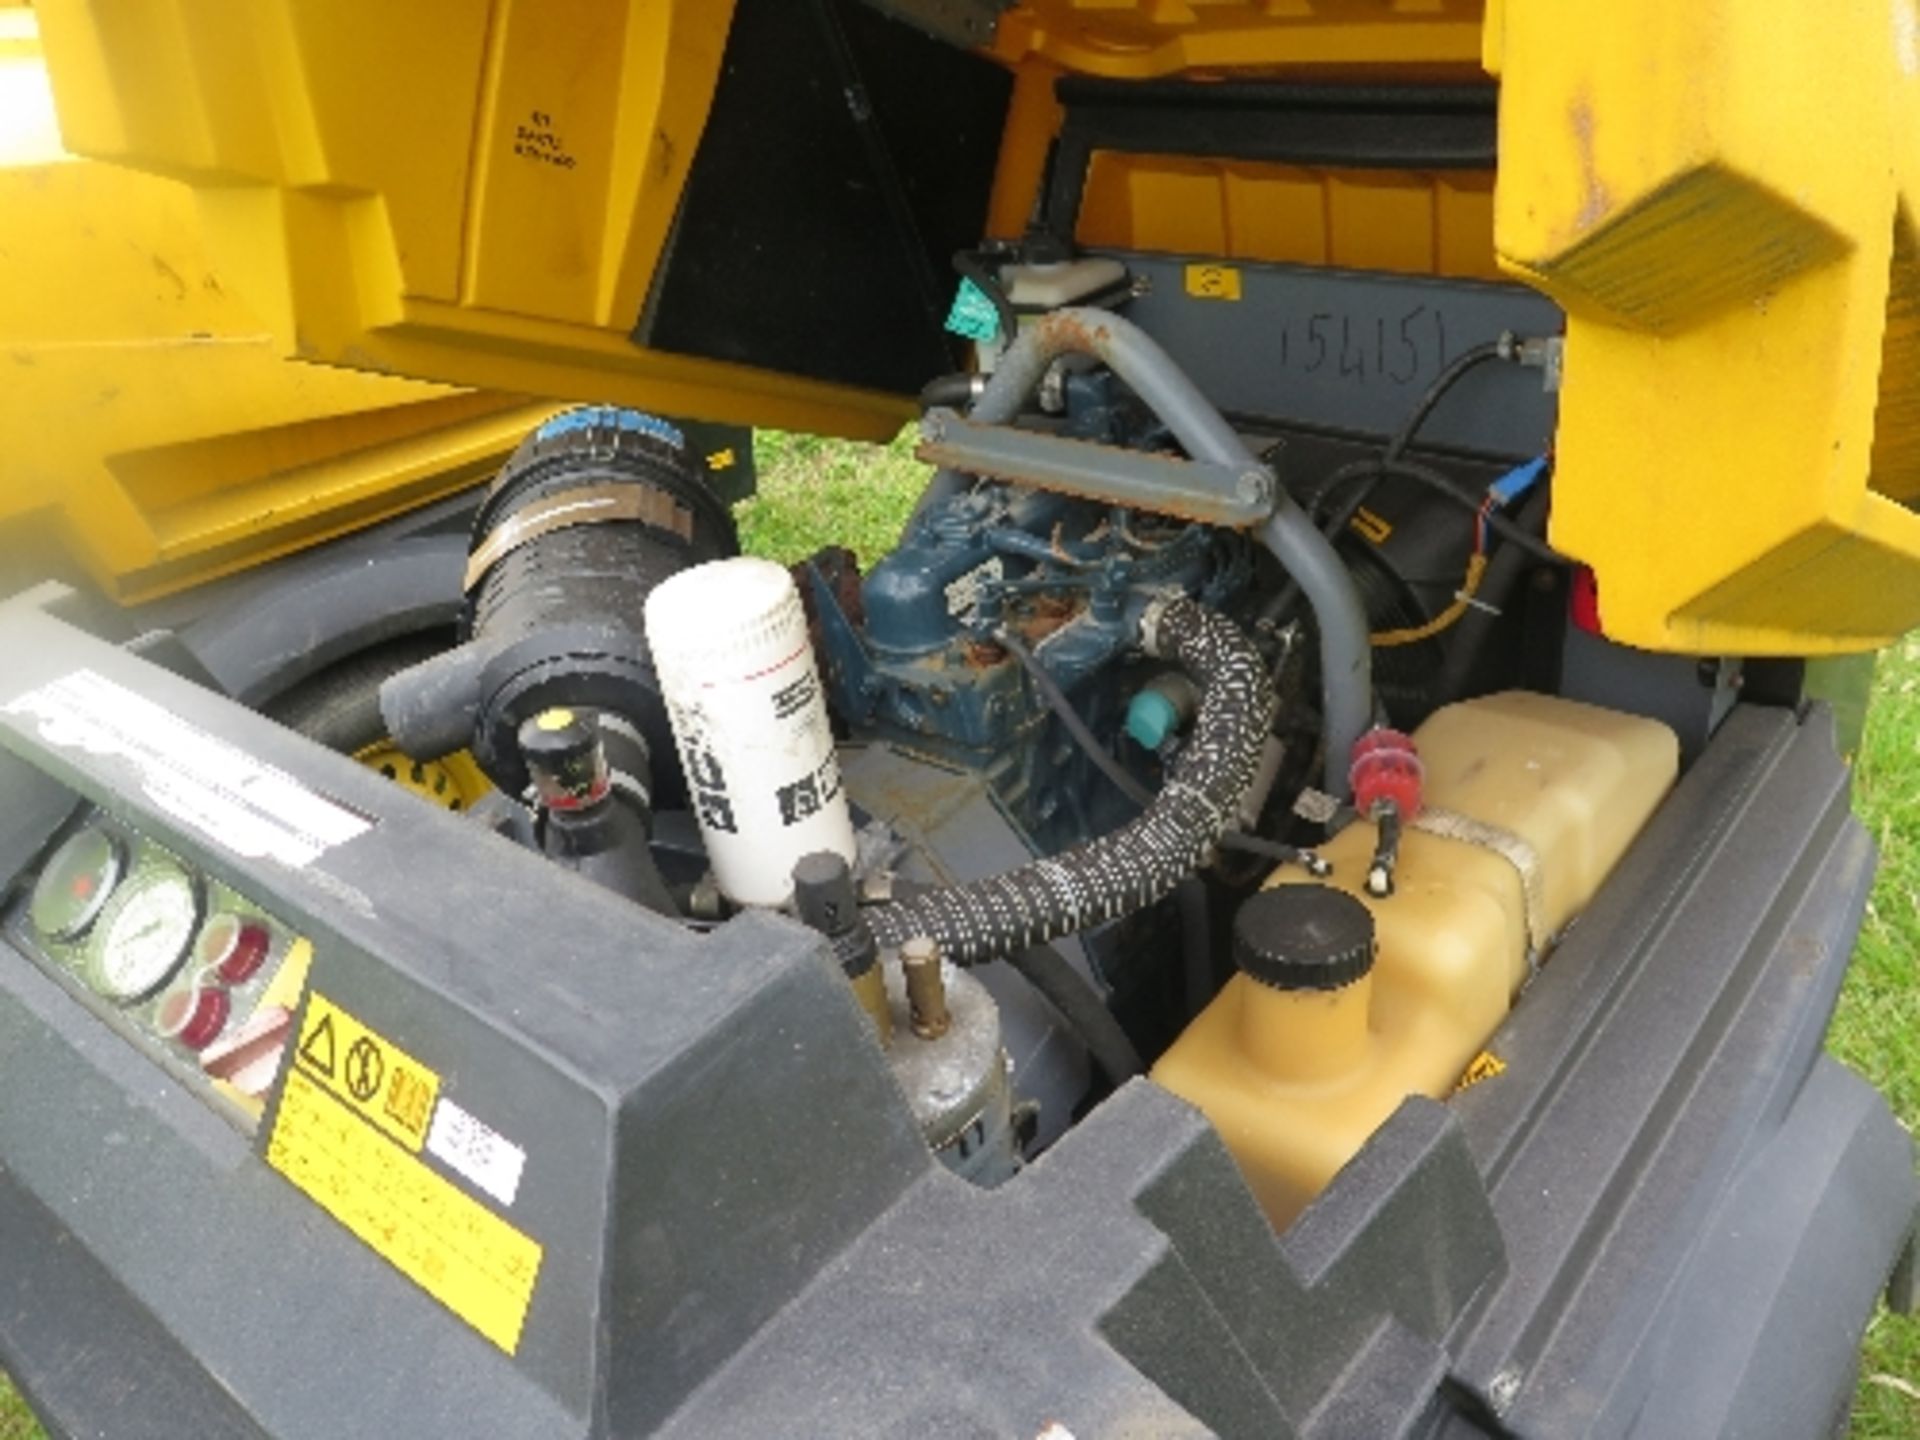 Atlas Copco XAS47 compressor 2007 154151
455 HOURS - KUBOTA - RUNS AND MAKES AIR
ALL LOTS are SOLD - Image 5 of 5